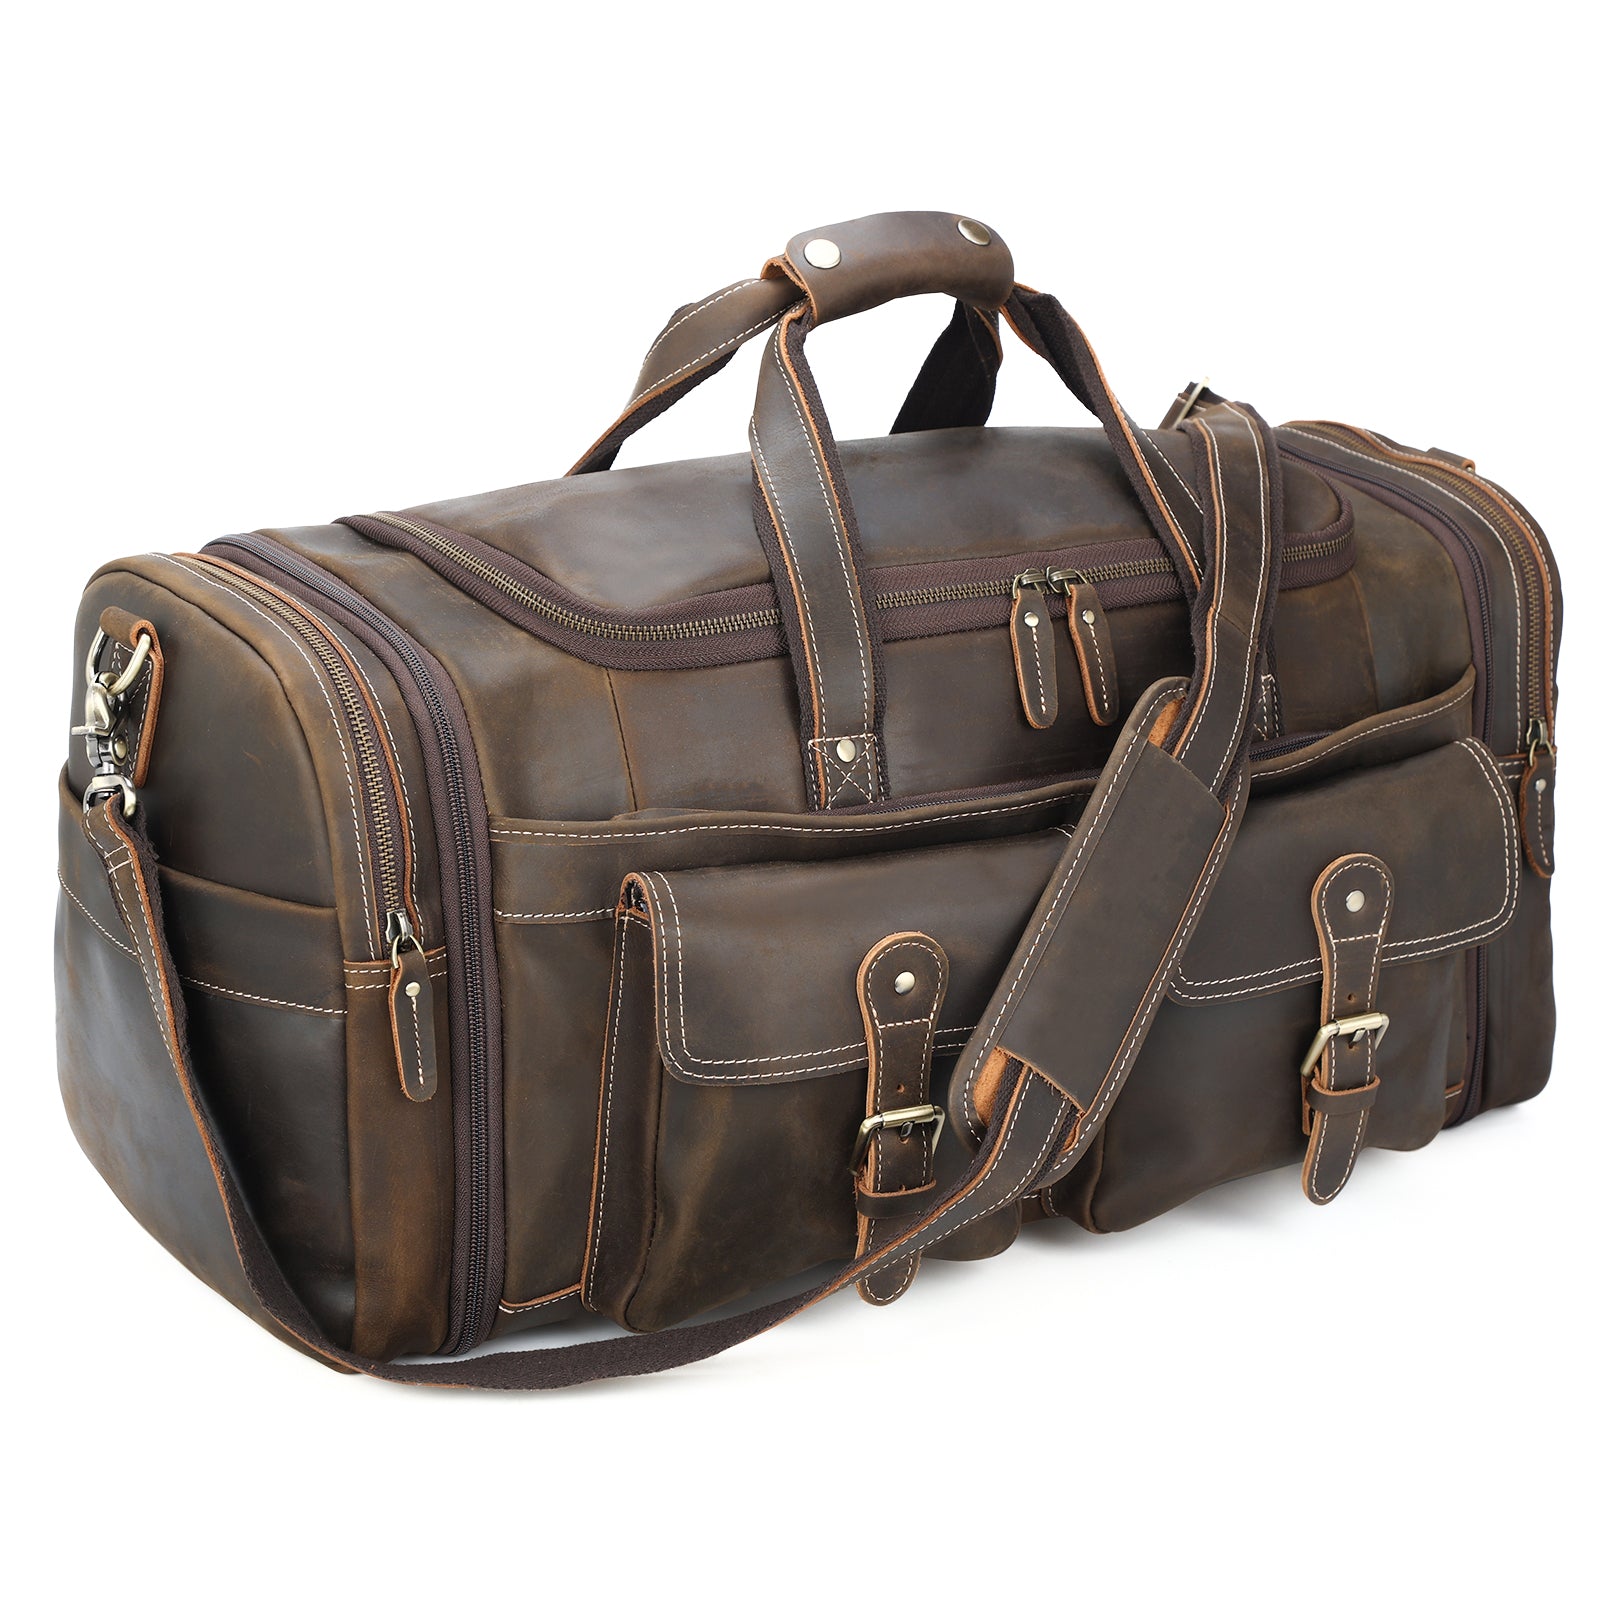 Polare 23 Waxed Canvas Cowhide Leather Travel Duffle Bag For Men 42L